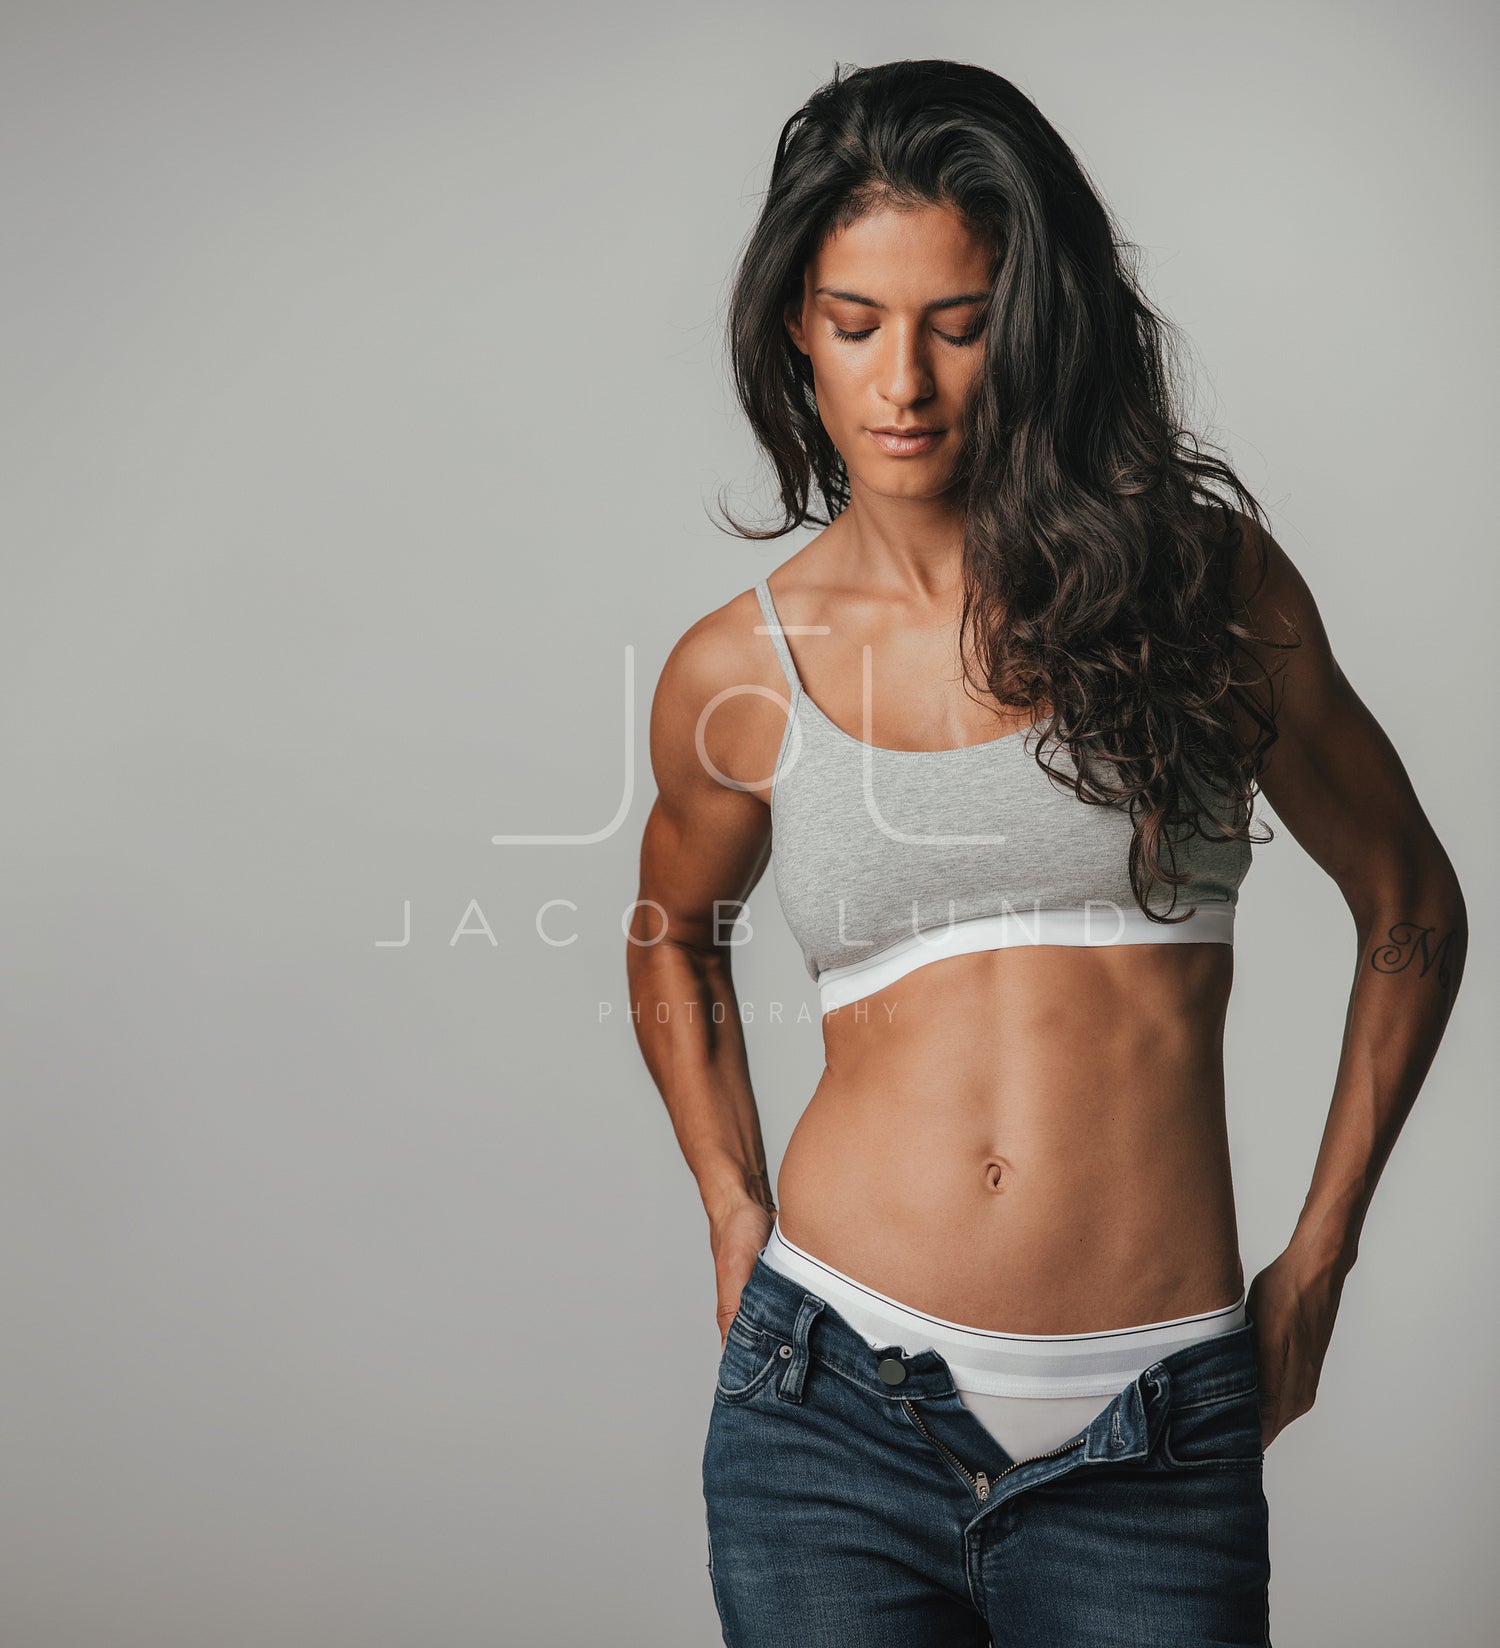 Fit young woman in unbuttoned tight blue jeans and gray sports bra